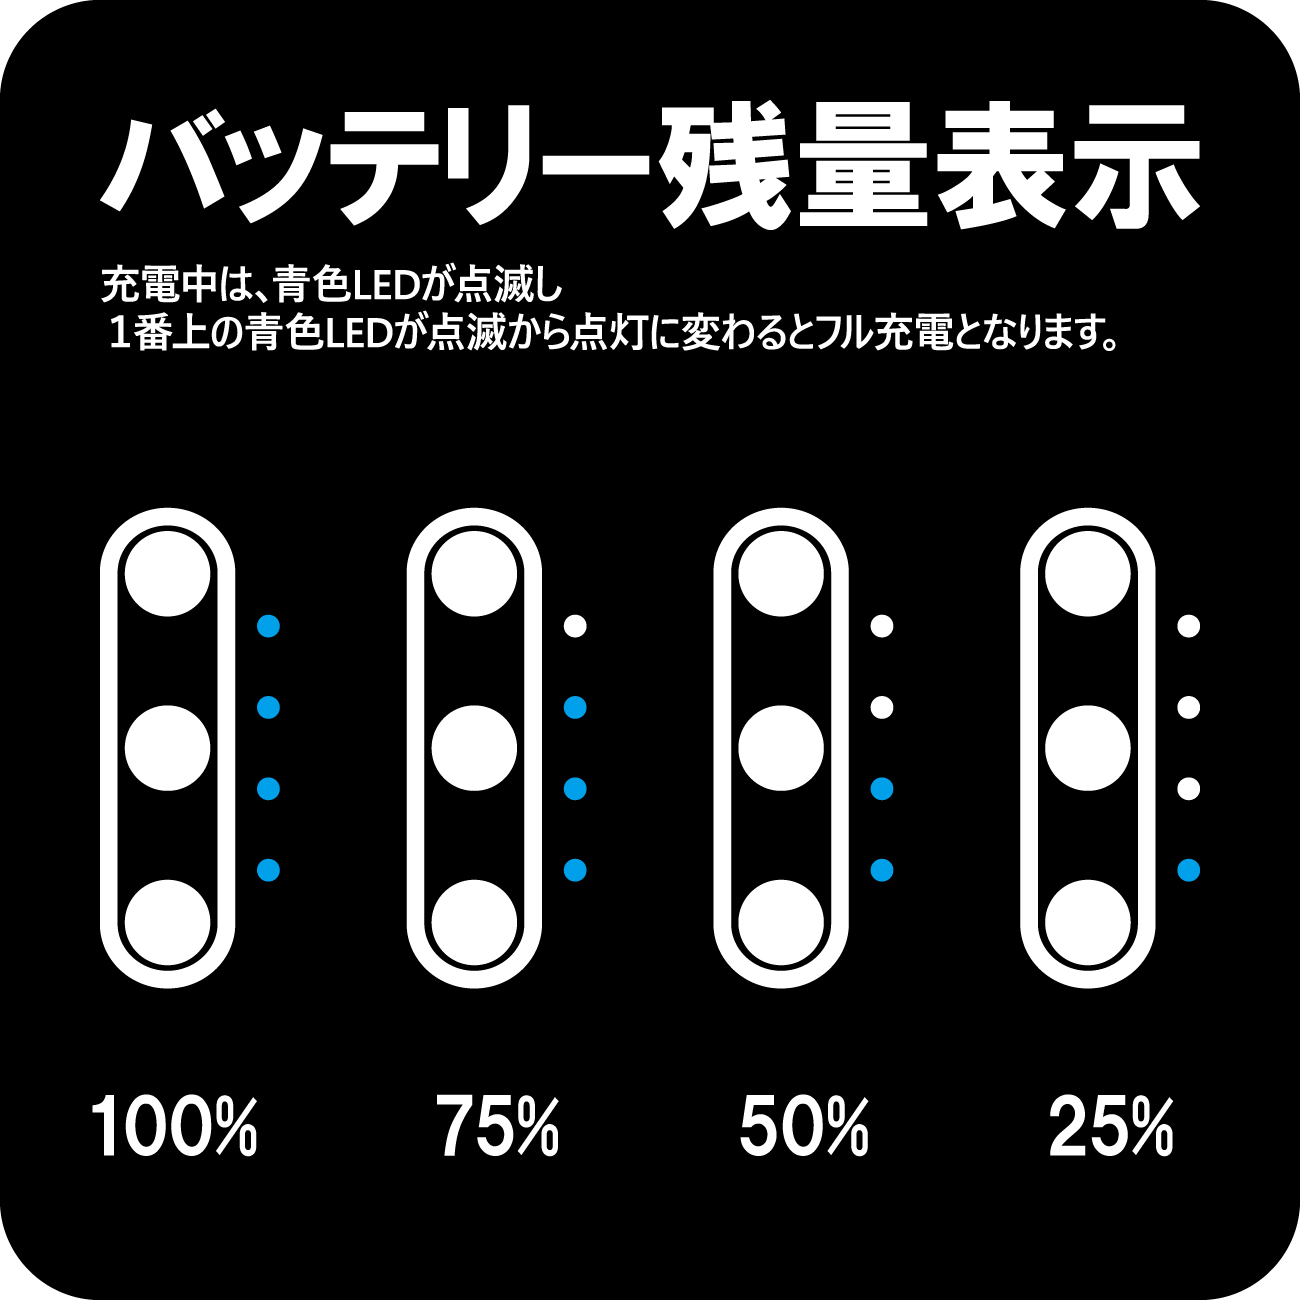 <p>【バッテリー残量表示】</p>